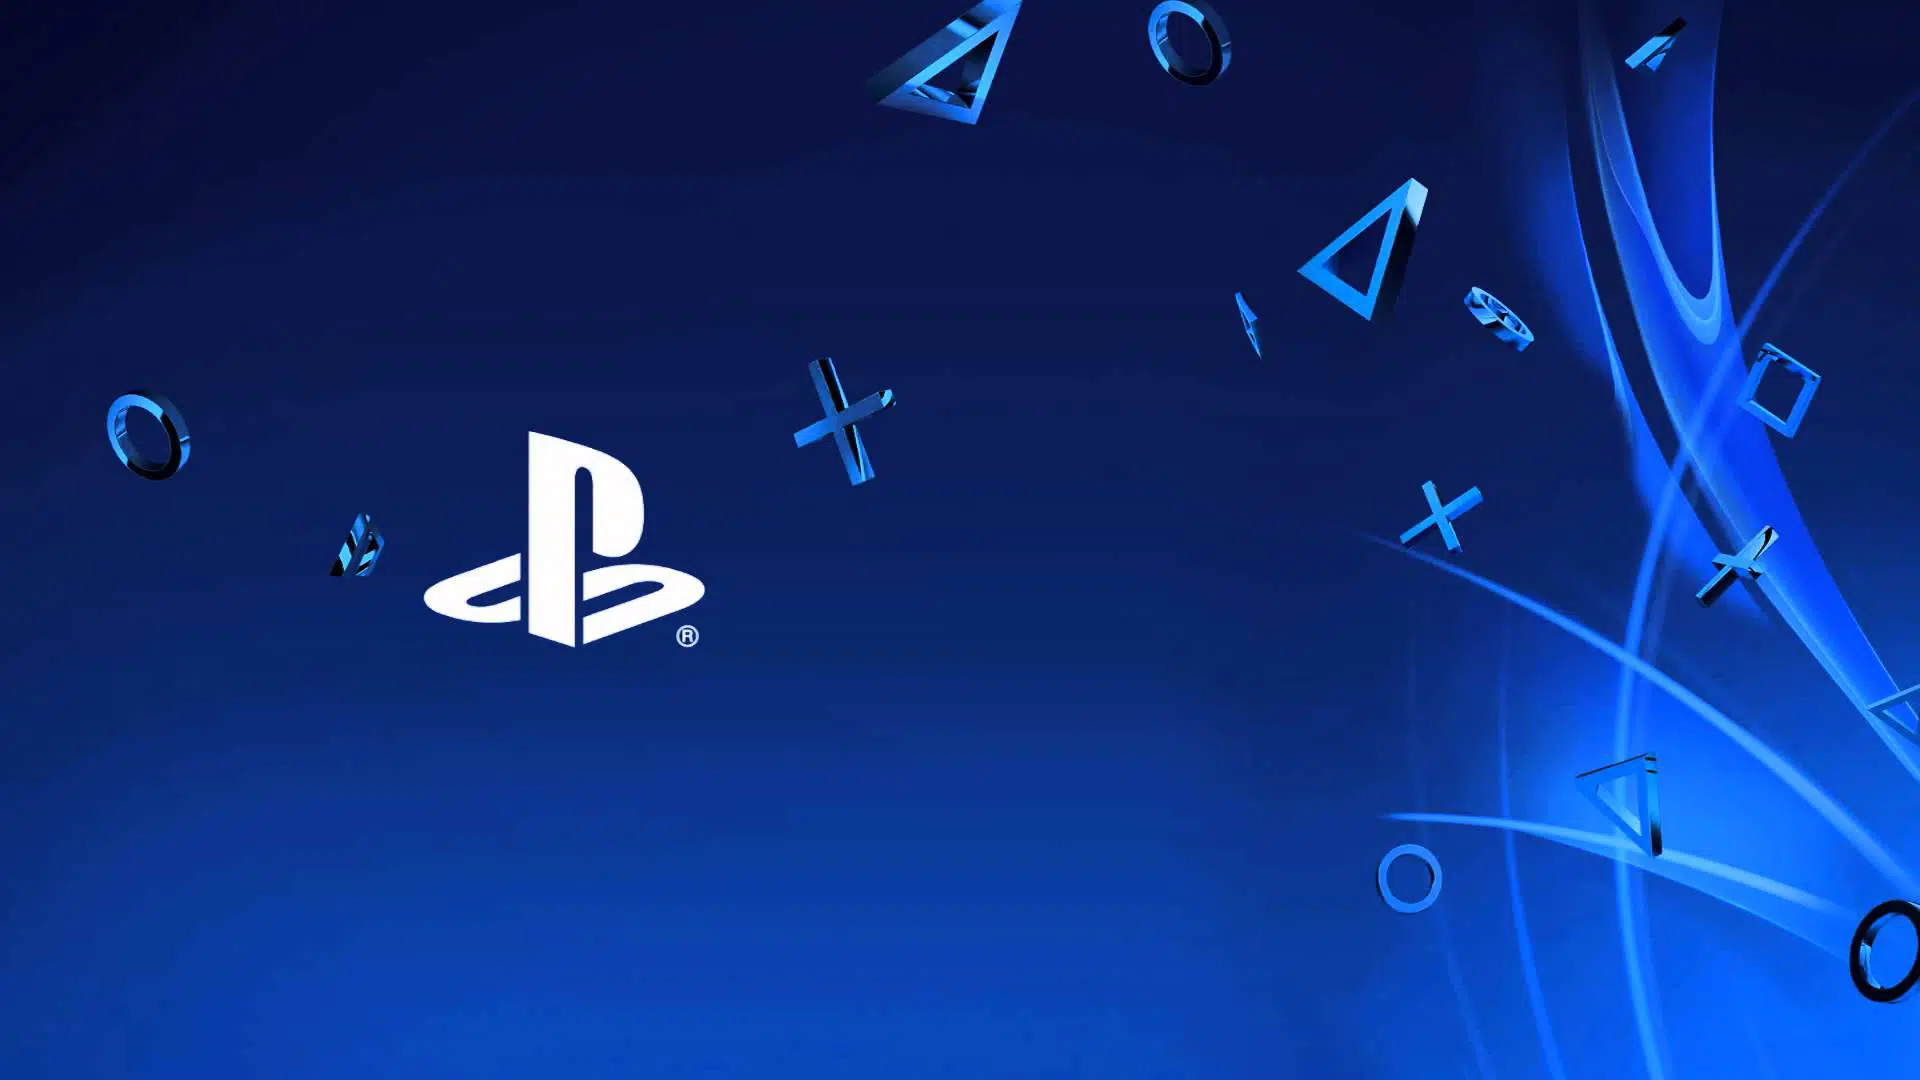 PlayStation Experience 2021 data